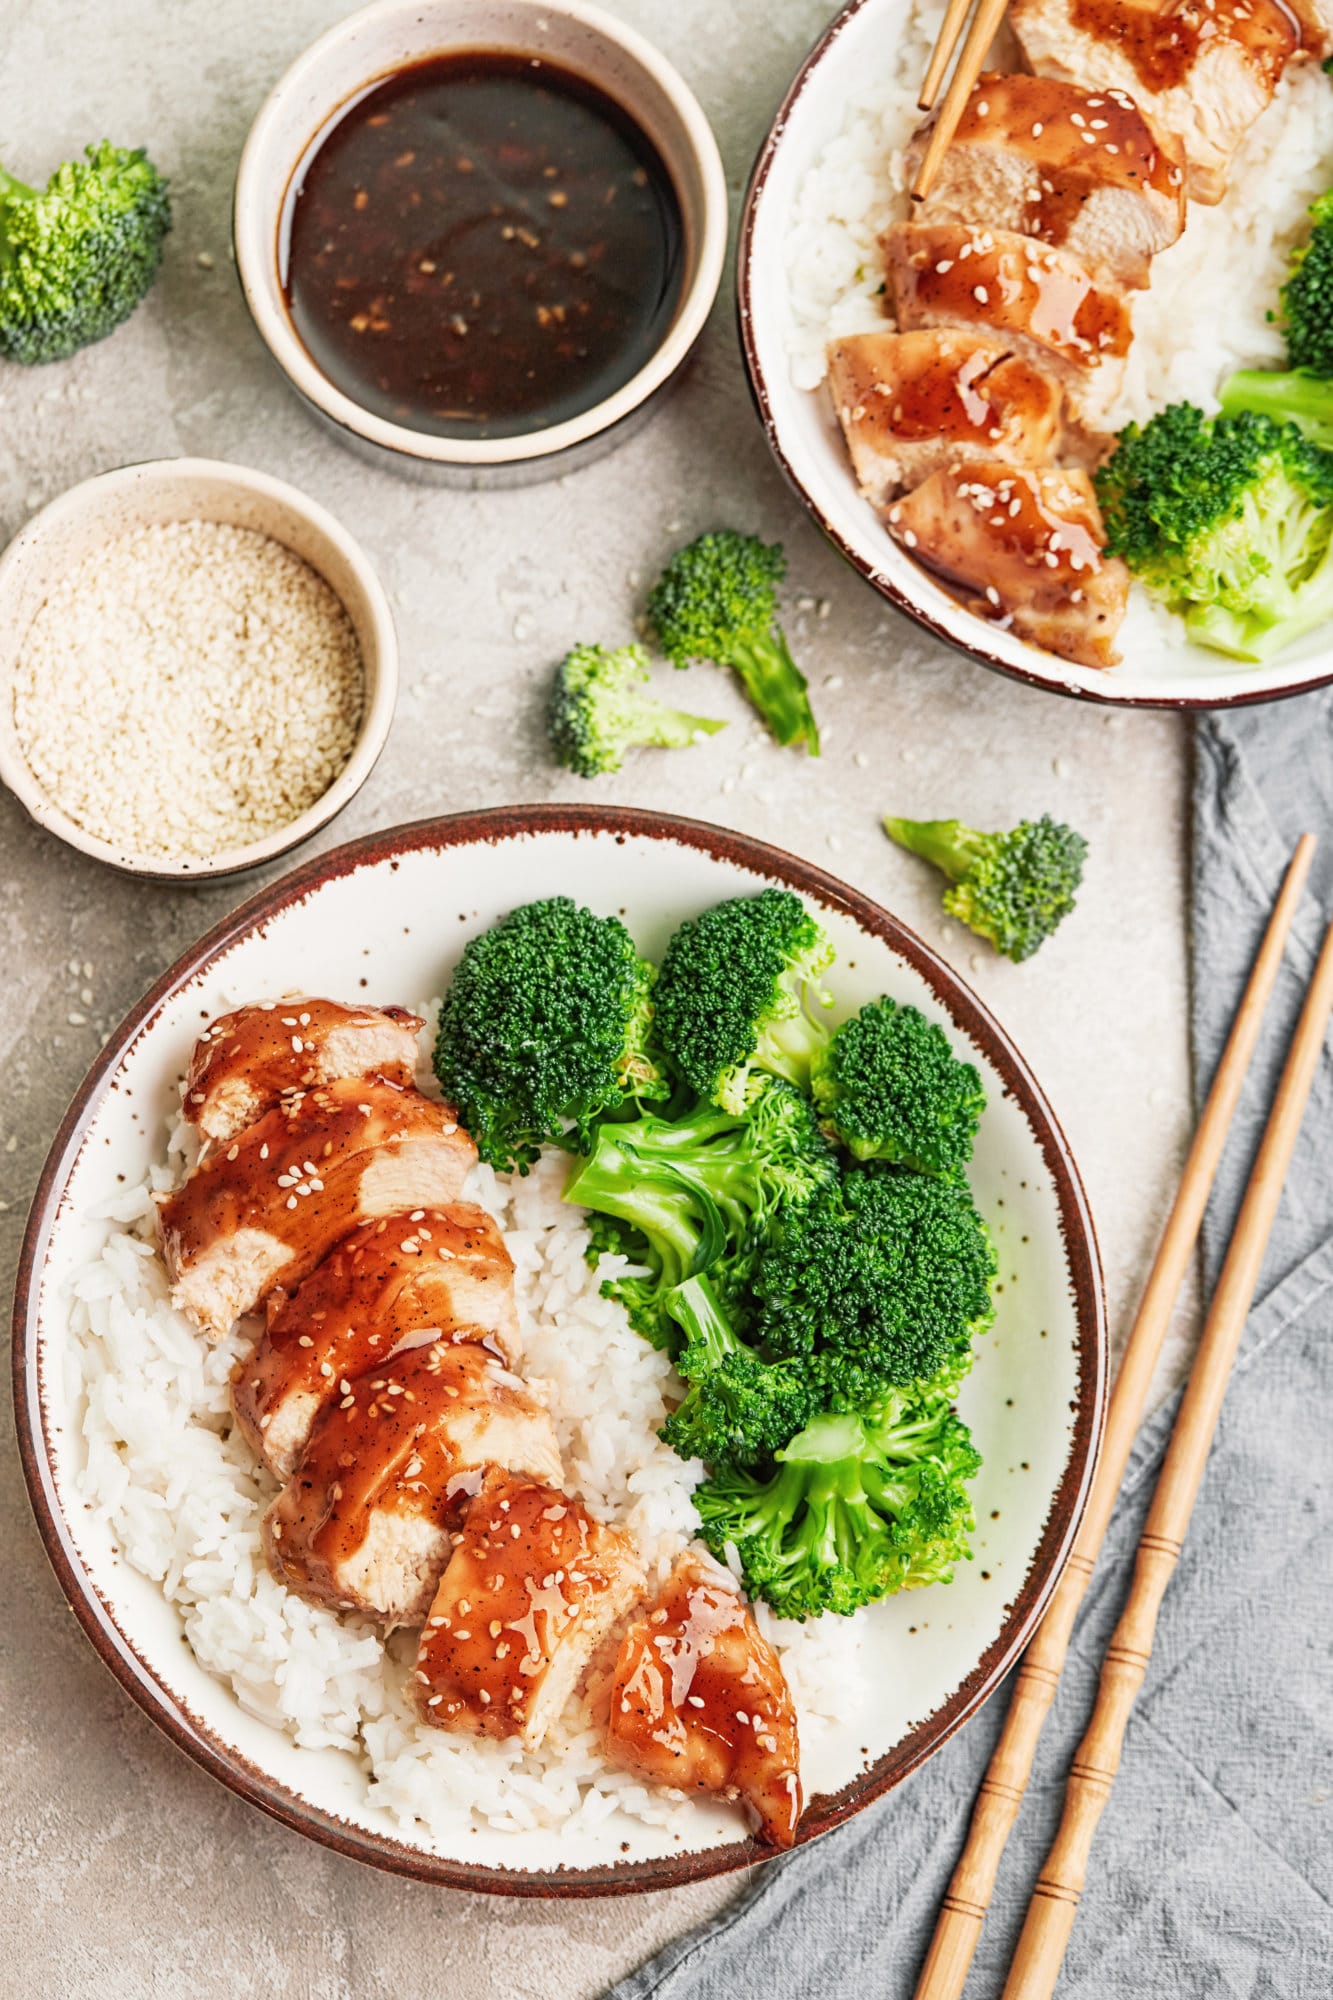 Two bowls of sliced teriyaki chicken over a bed of rice with broccoli and chopsticks on the side.